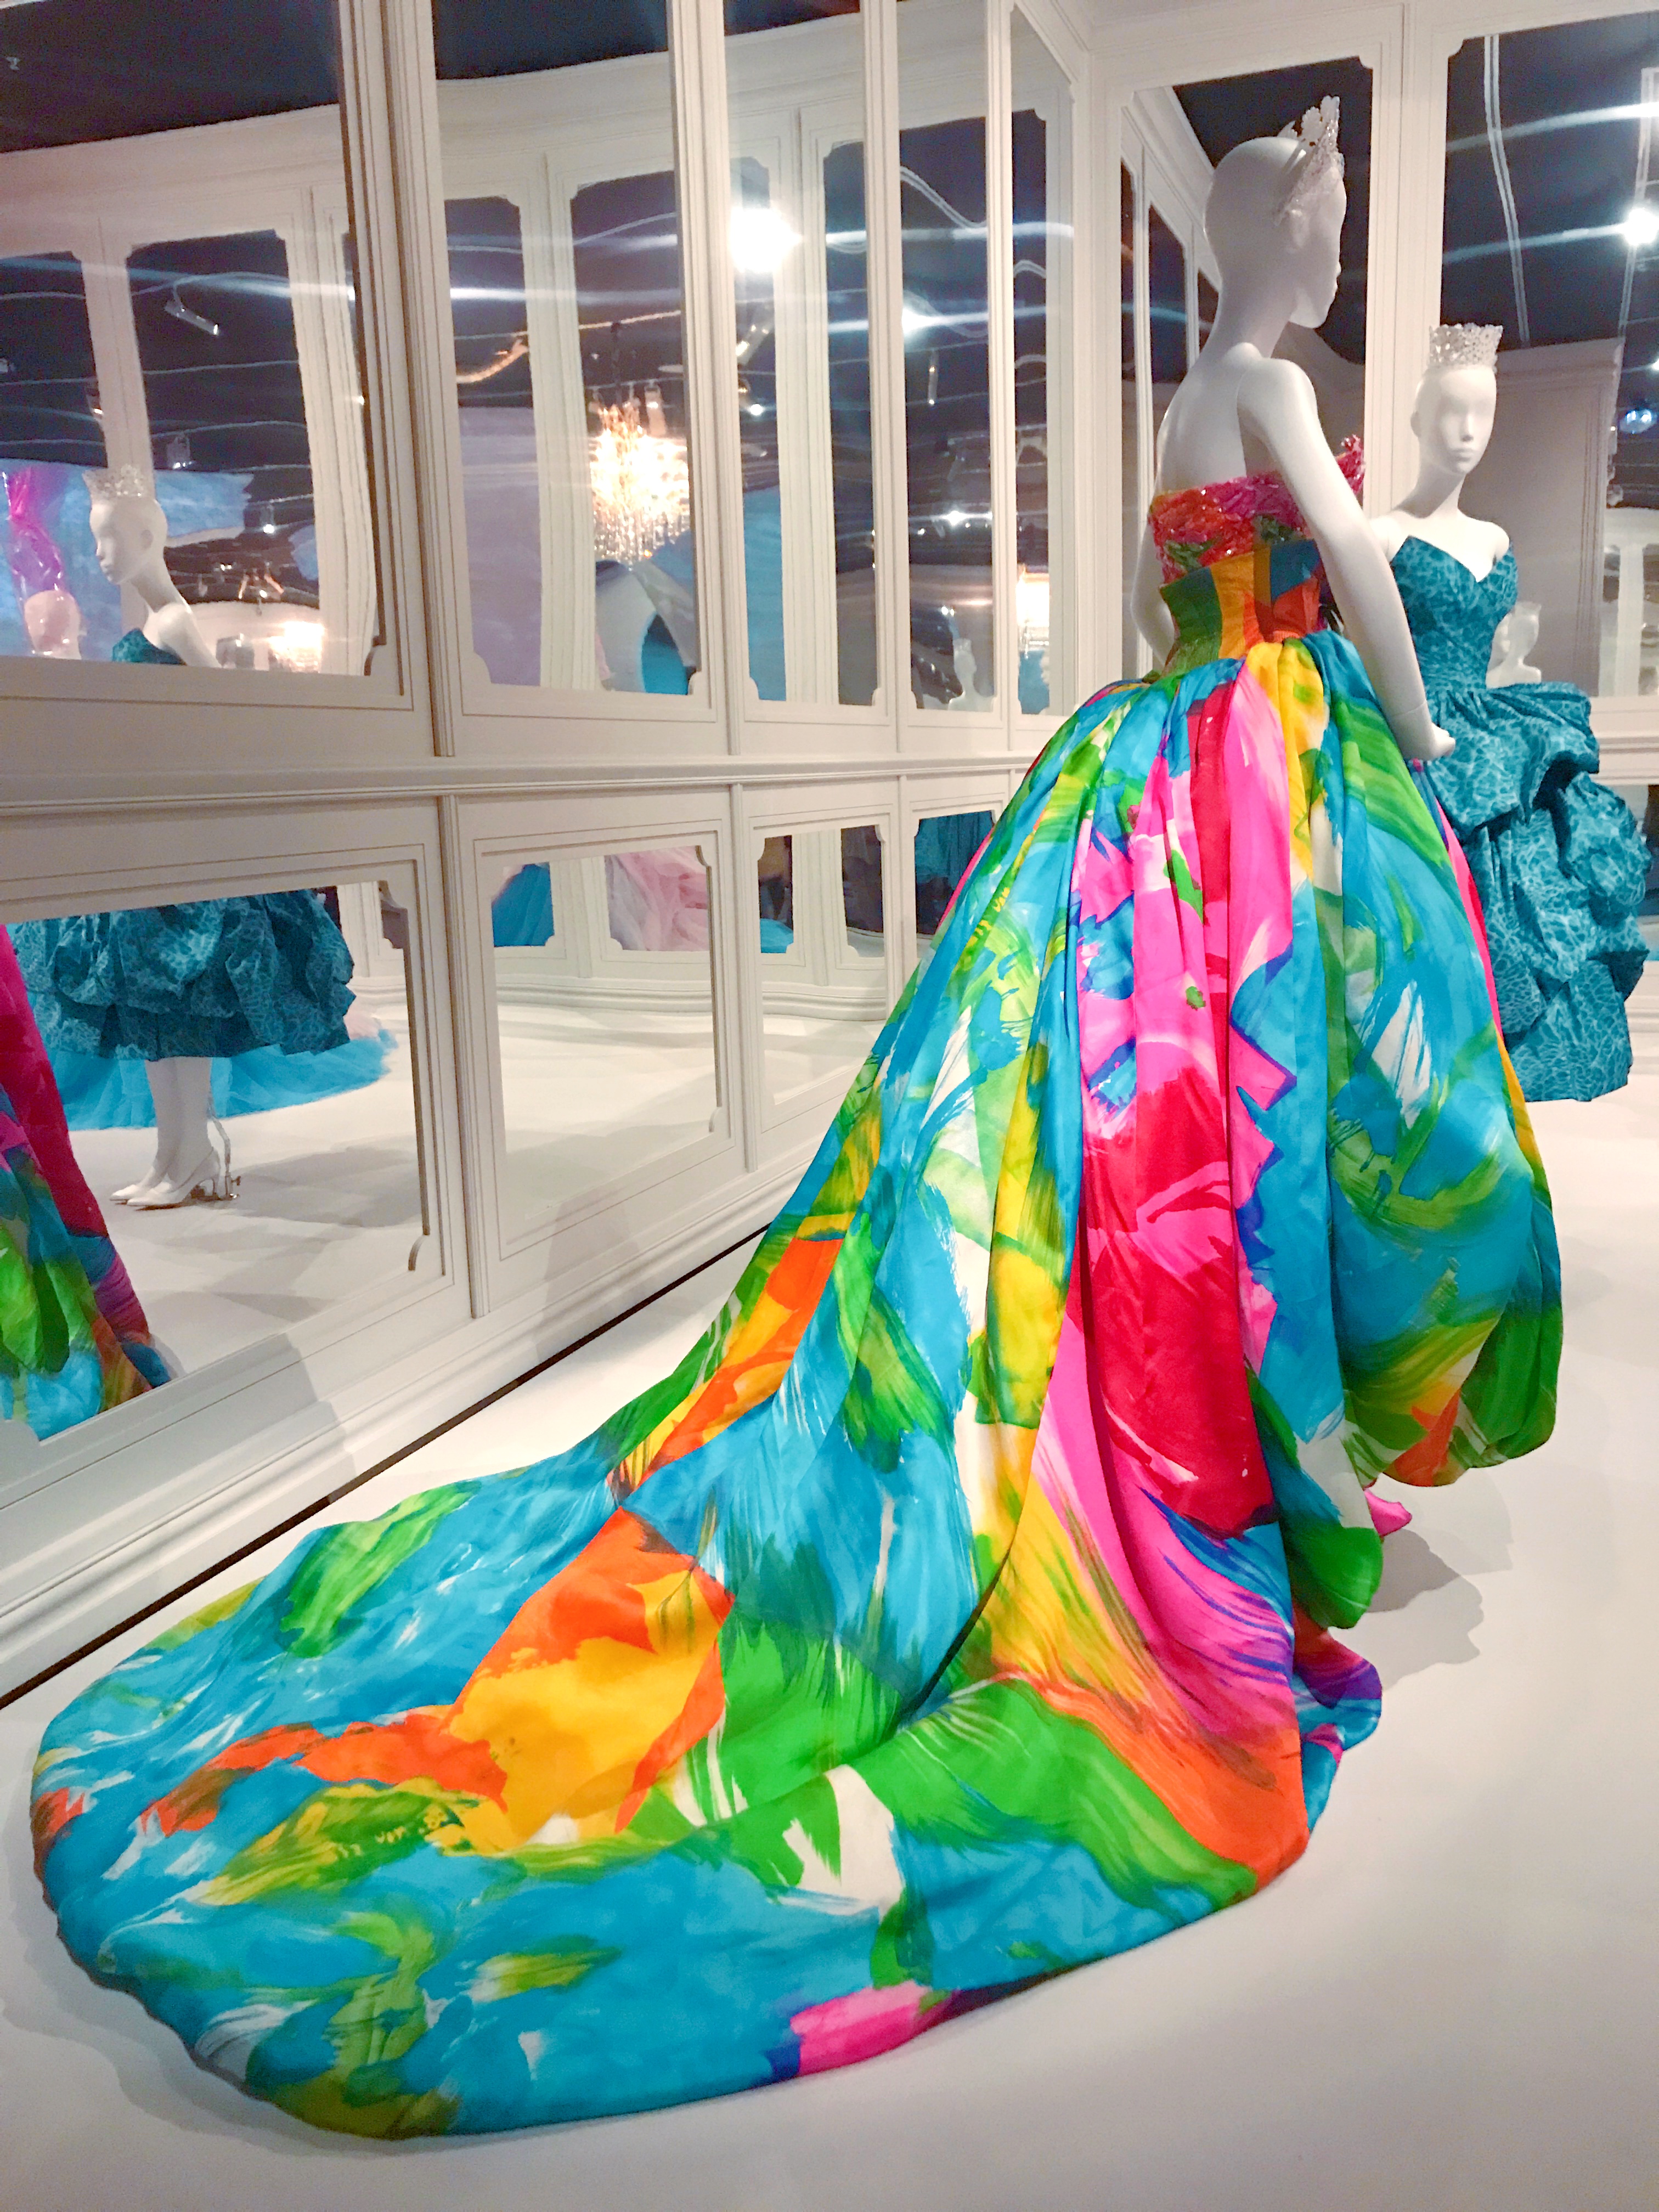 ‘The House of Dior’ Exhibition | National Gallery of Victoria